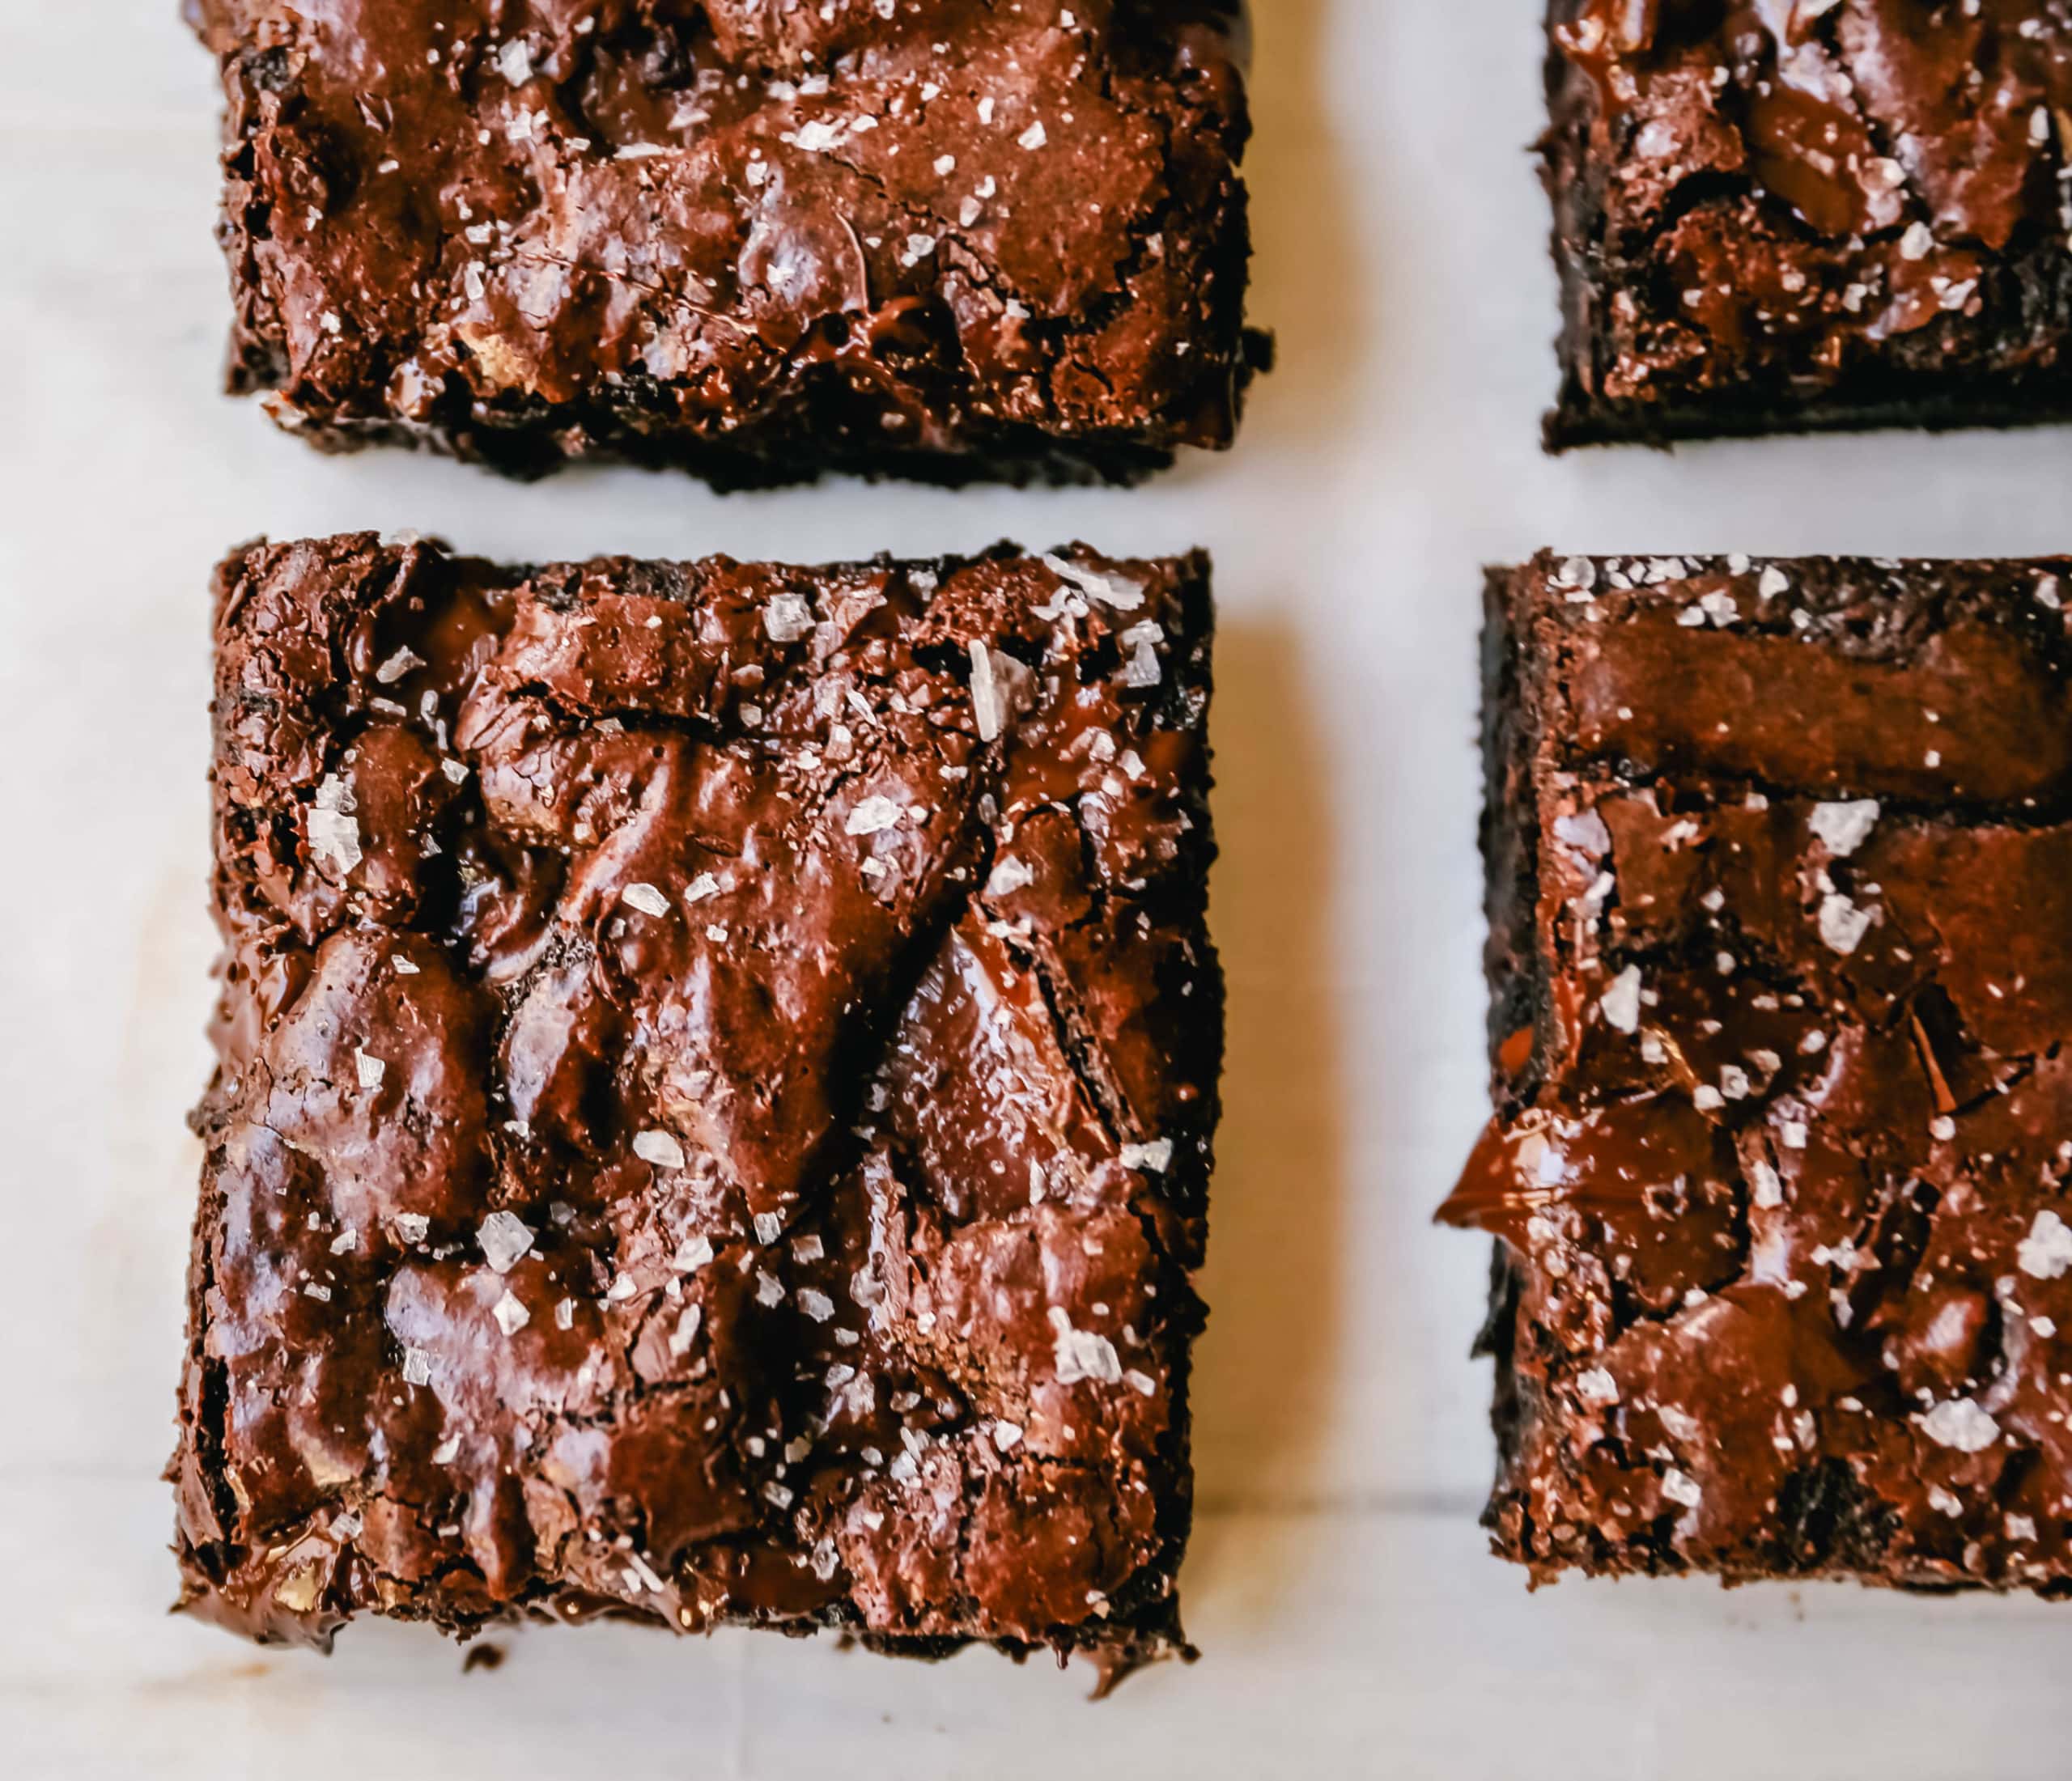 One Bowl Fudgy Chocolate Brownies How to make the easiest and quickest rich, decadent, fudgy, homemade chocolate brownies. These homemade brownies will knock your socks off! www.modernhoney.com #brownie #brownies #chocolate #chocolatebrownies